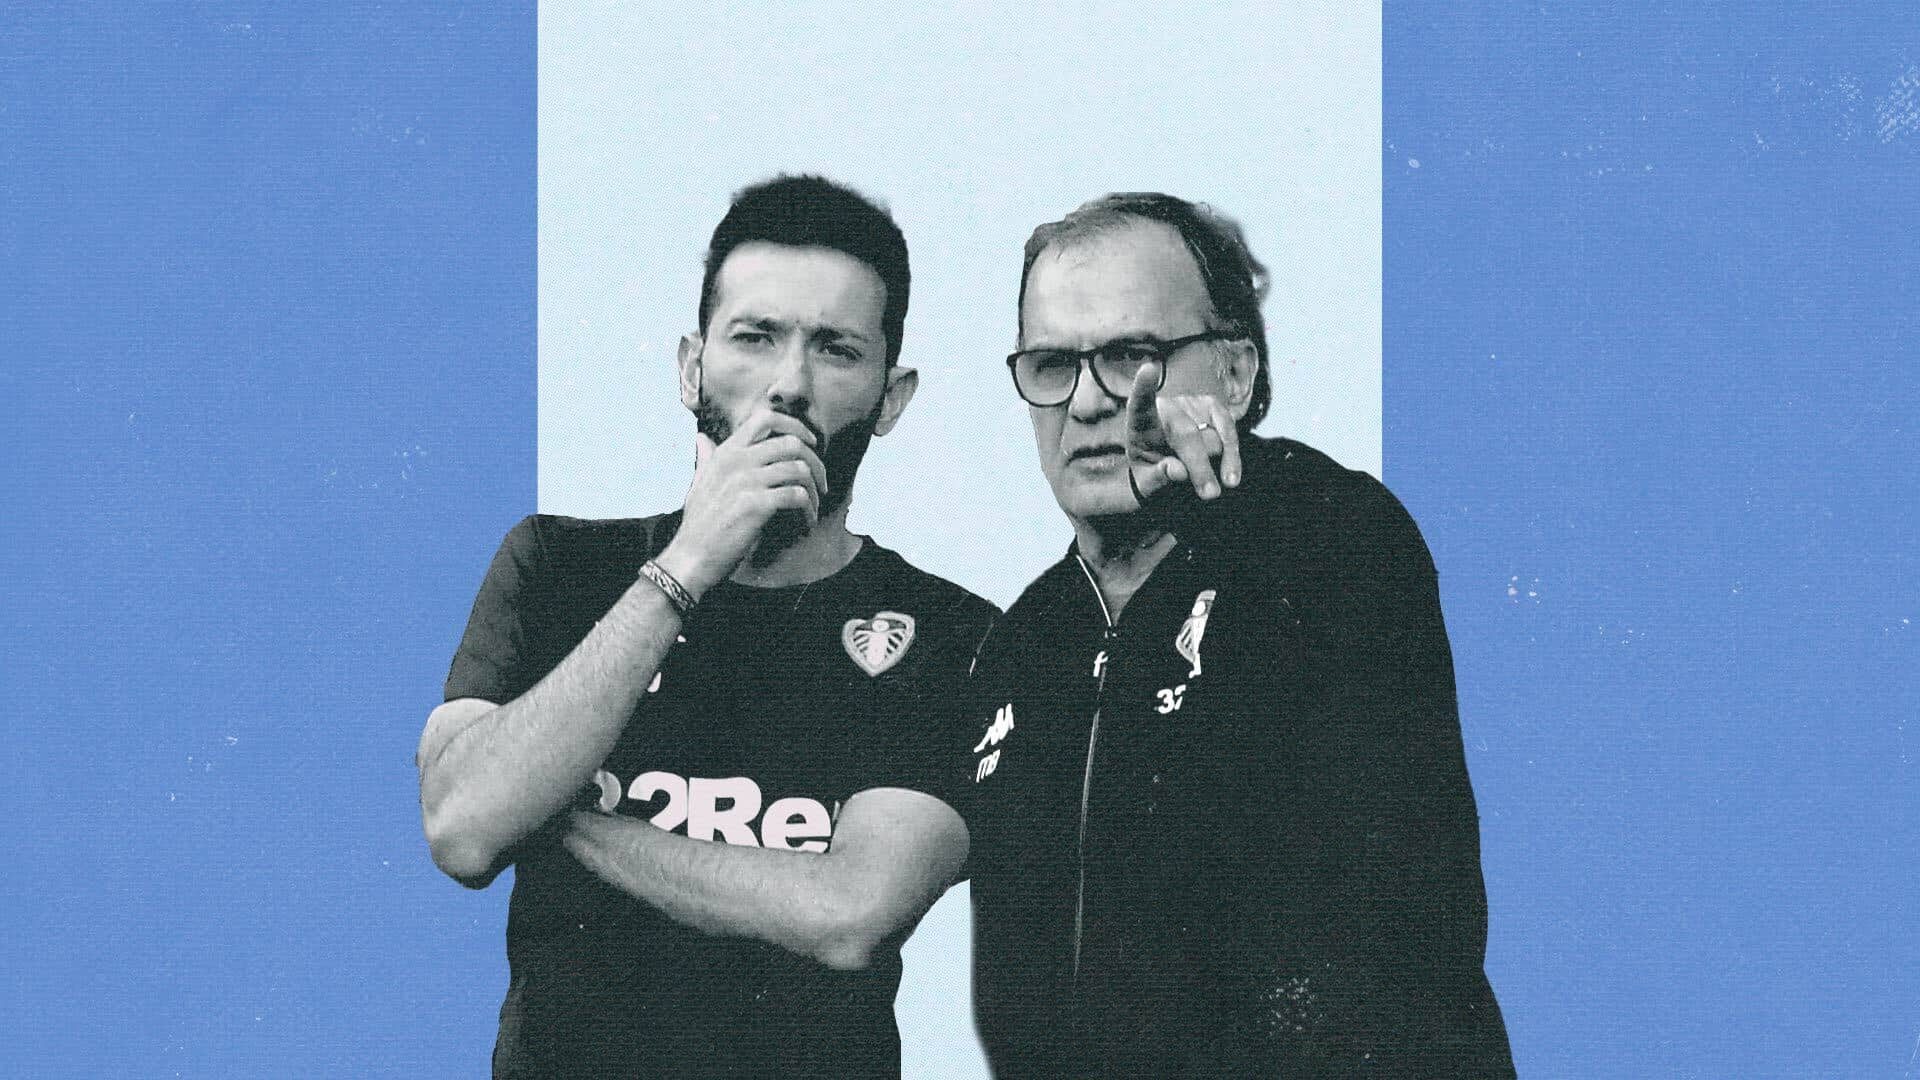 Carlos Corberan, with Marcelo Bielsa, who is pointing at a nearby kennel